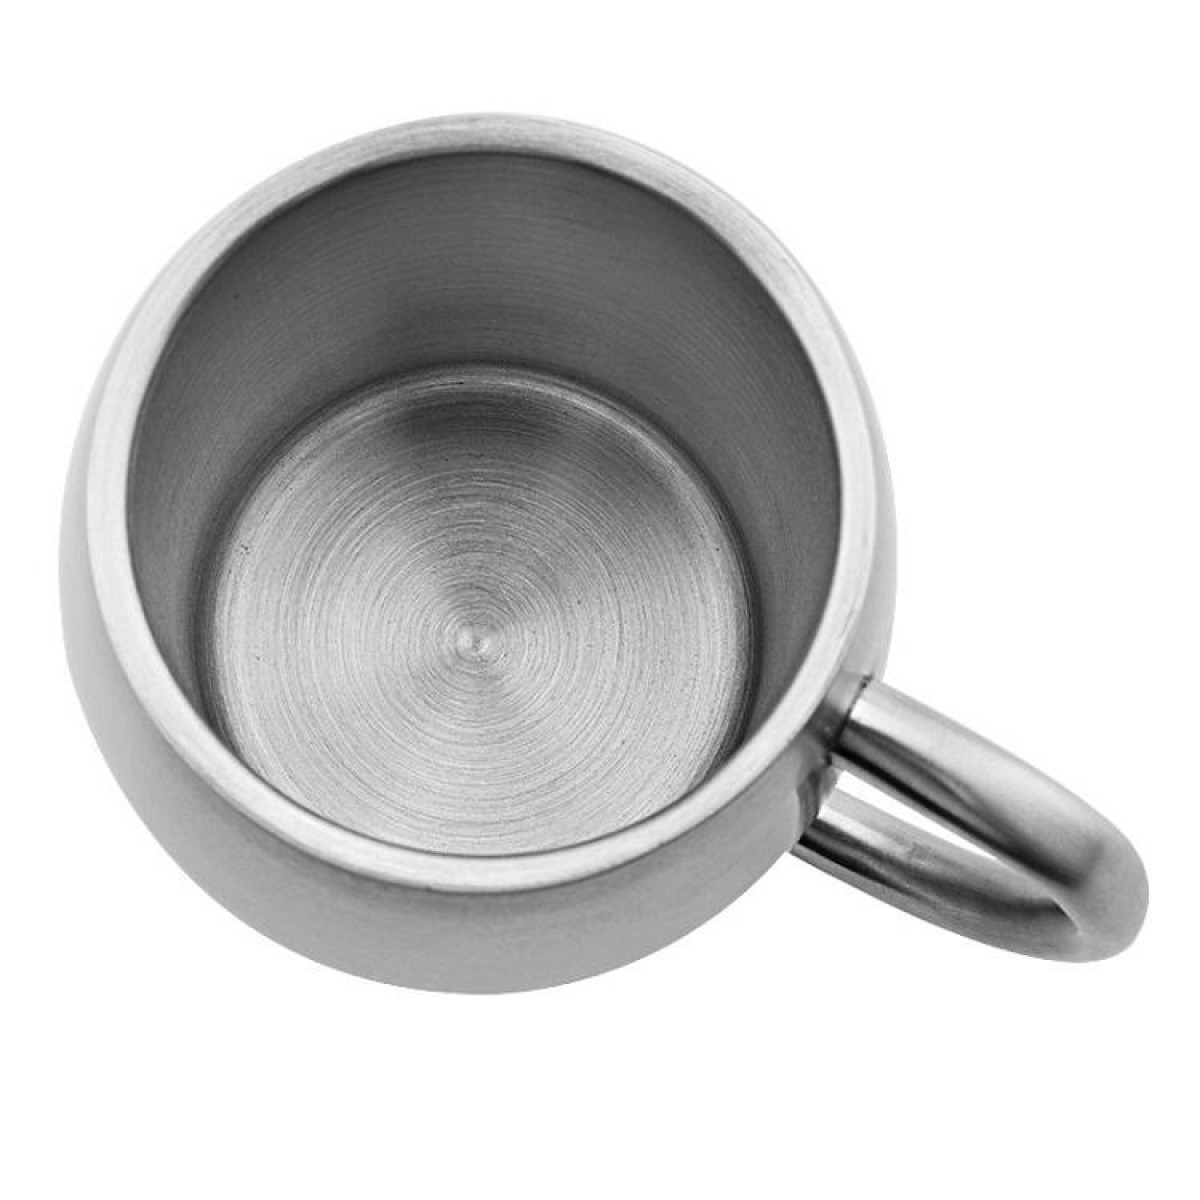 Stainless Steel Double Beer Mug Belly Cup